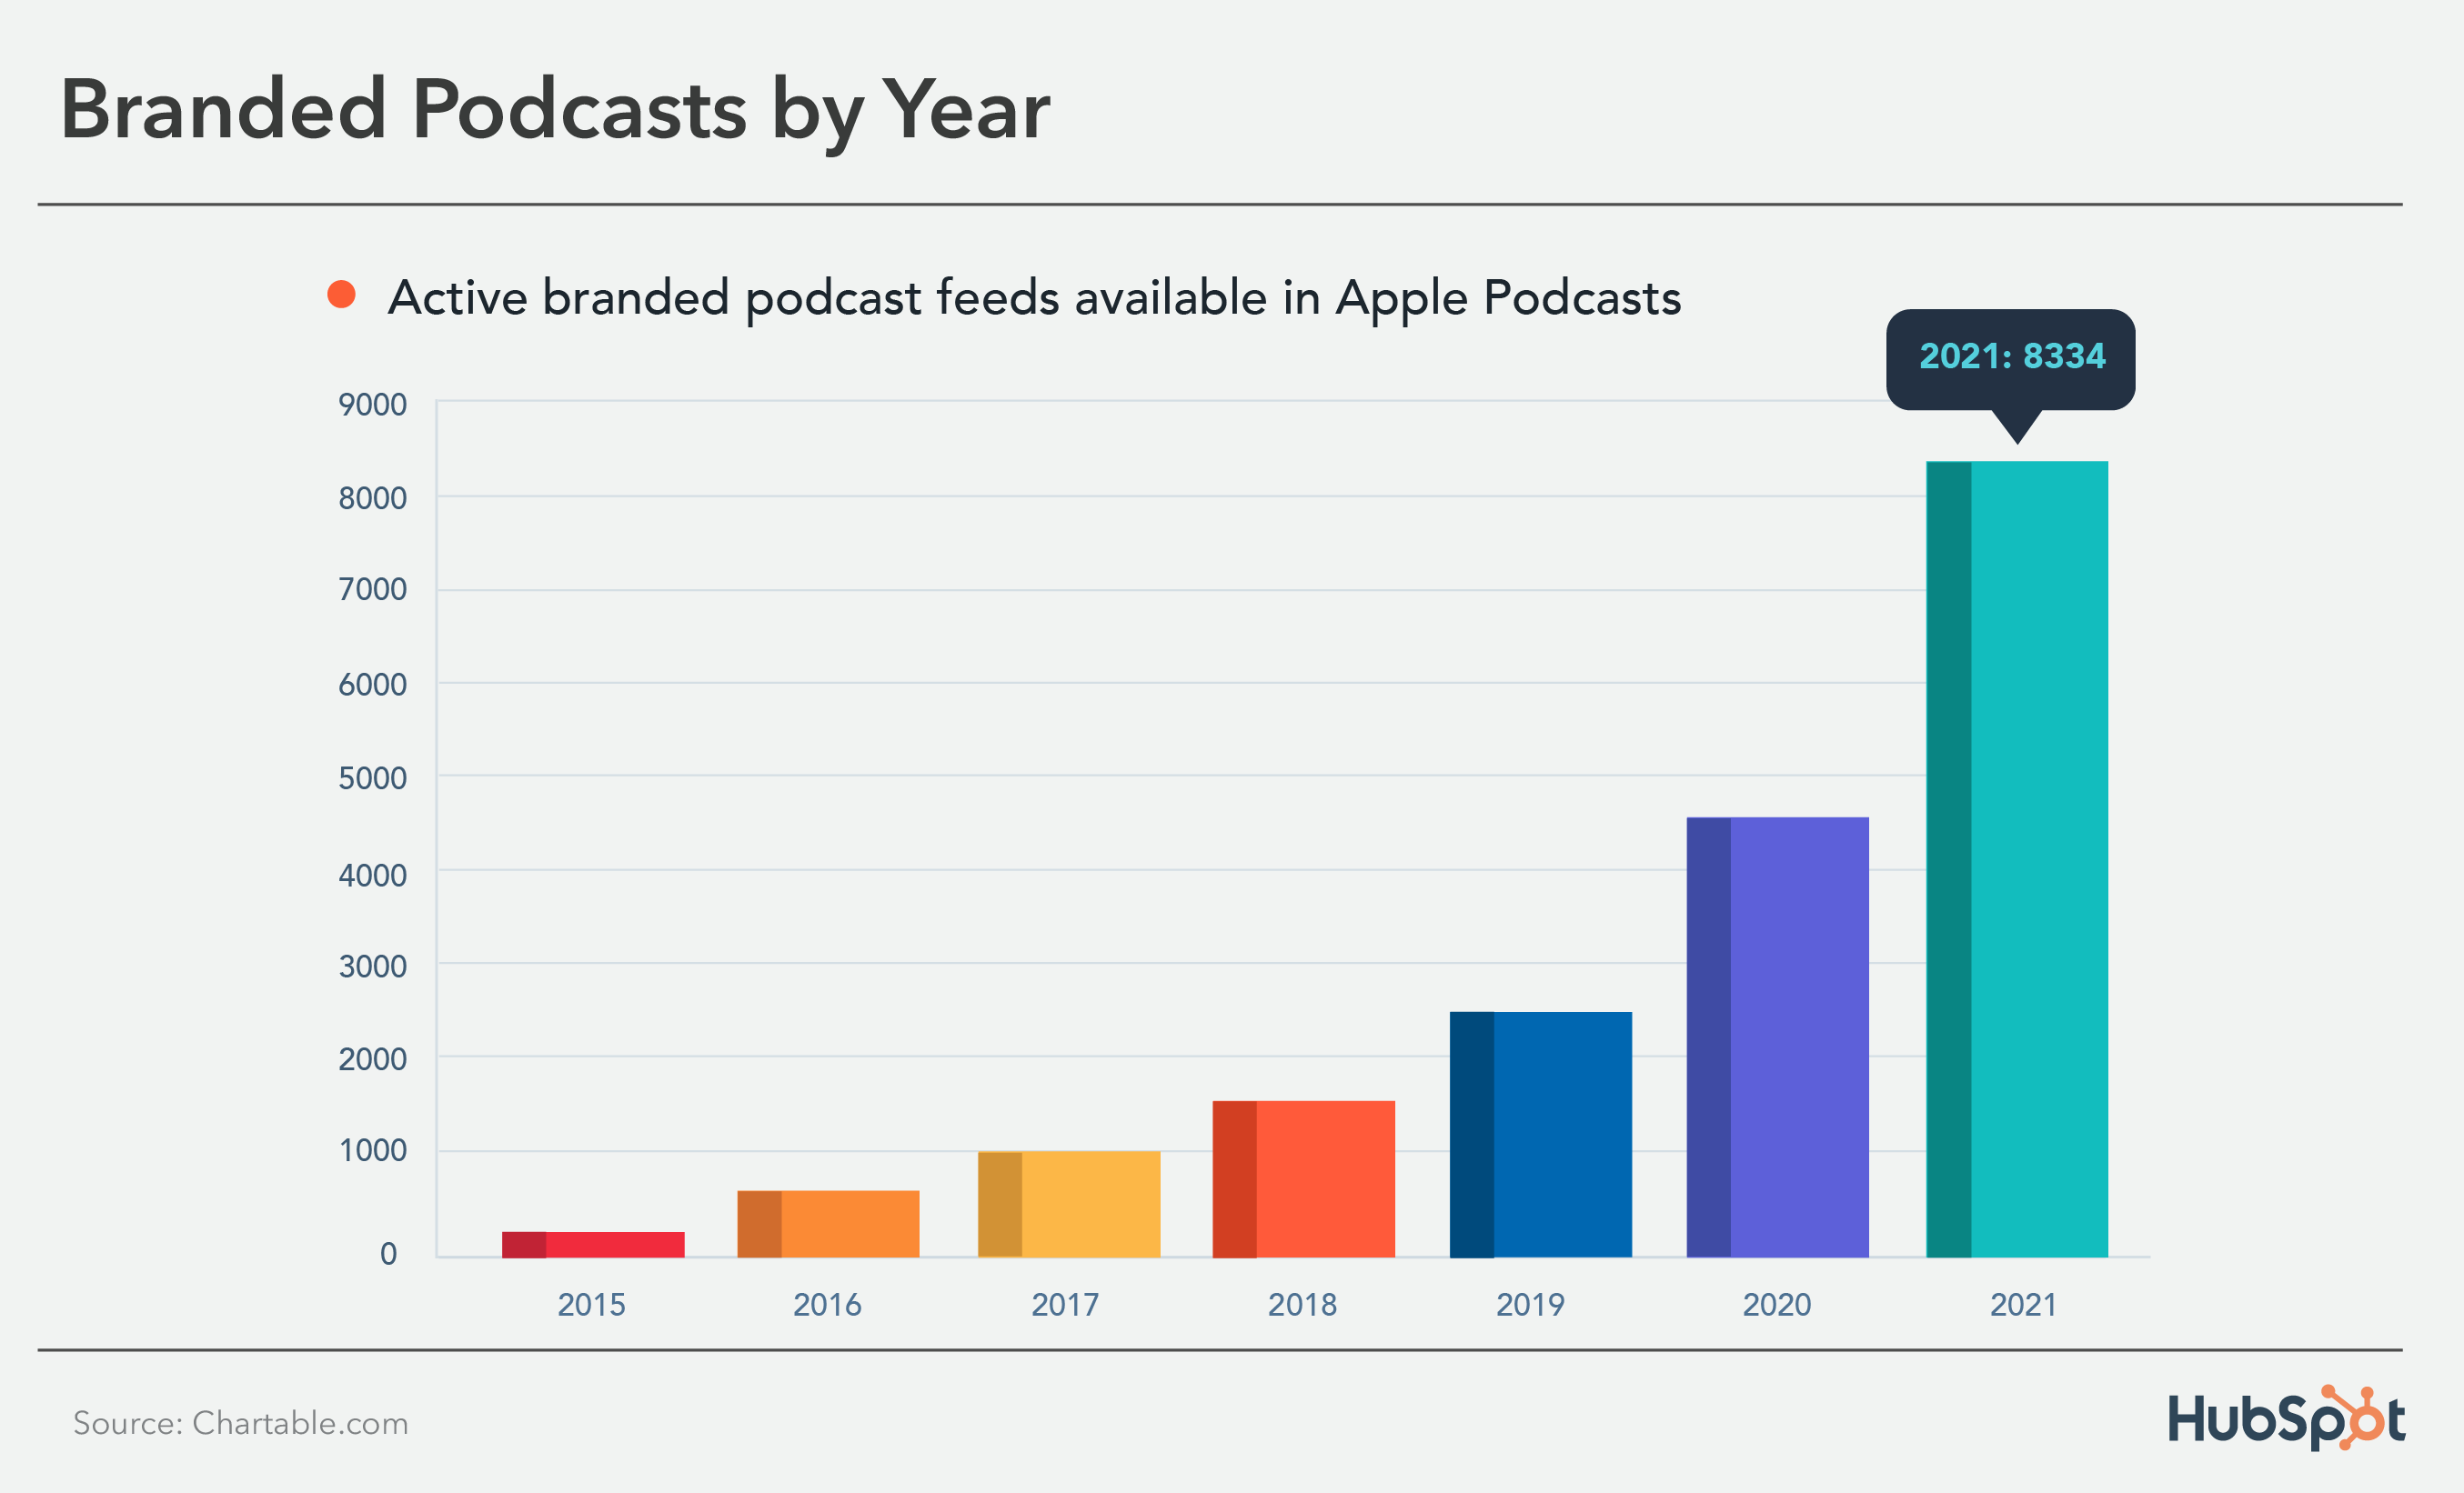 Podcast Statistics: Number of branded podcasts per year